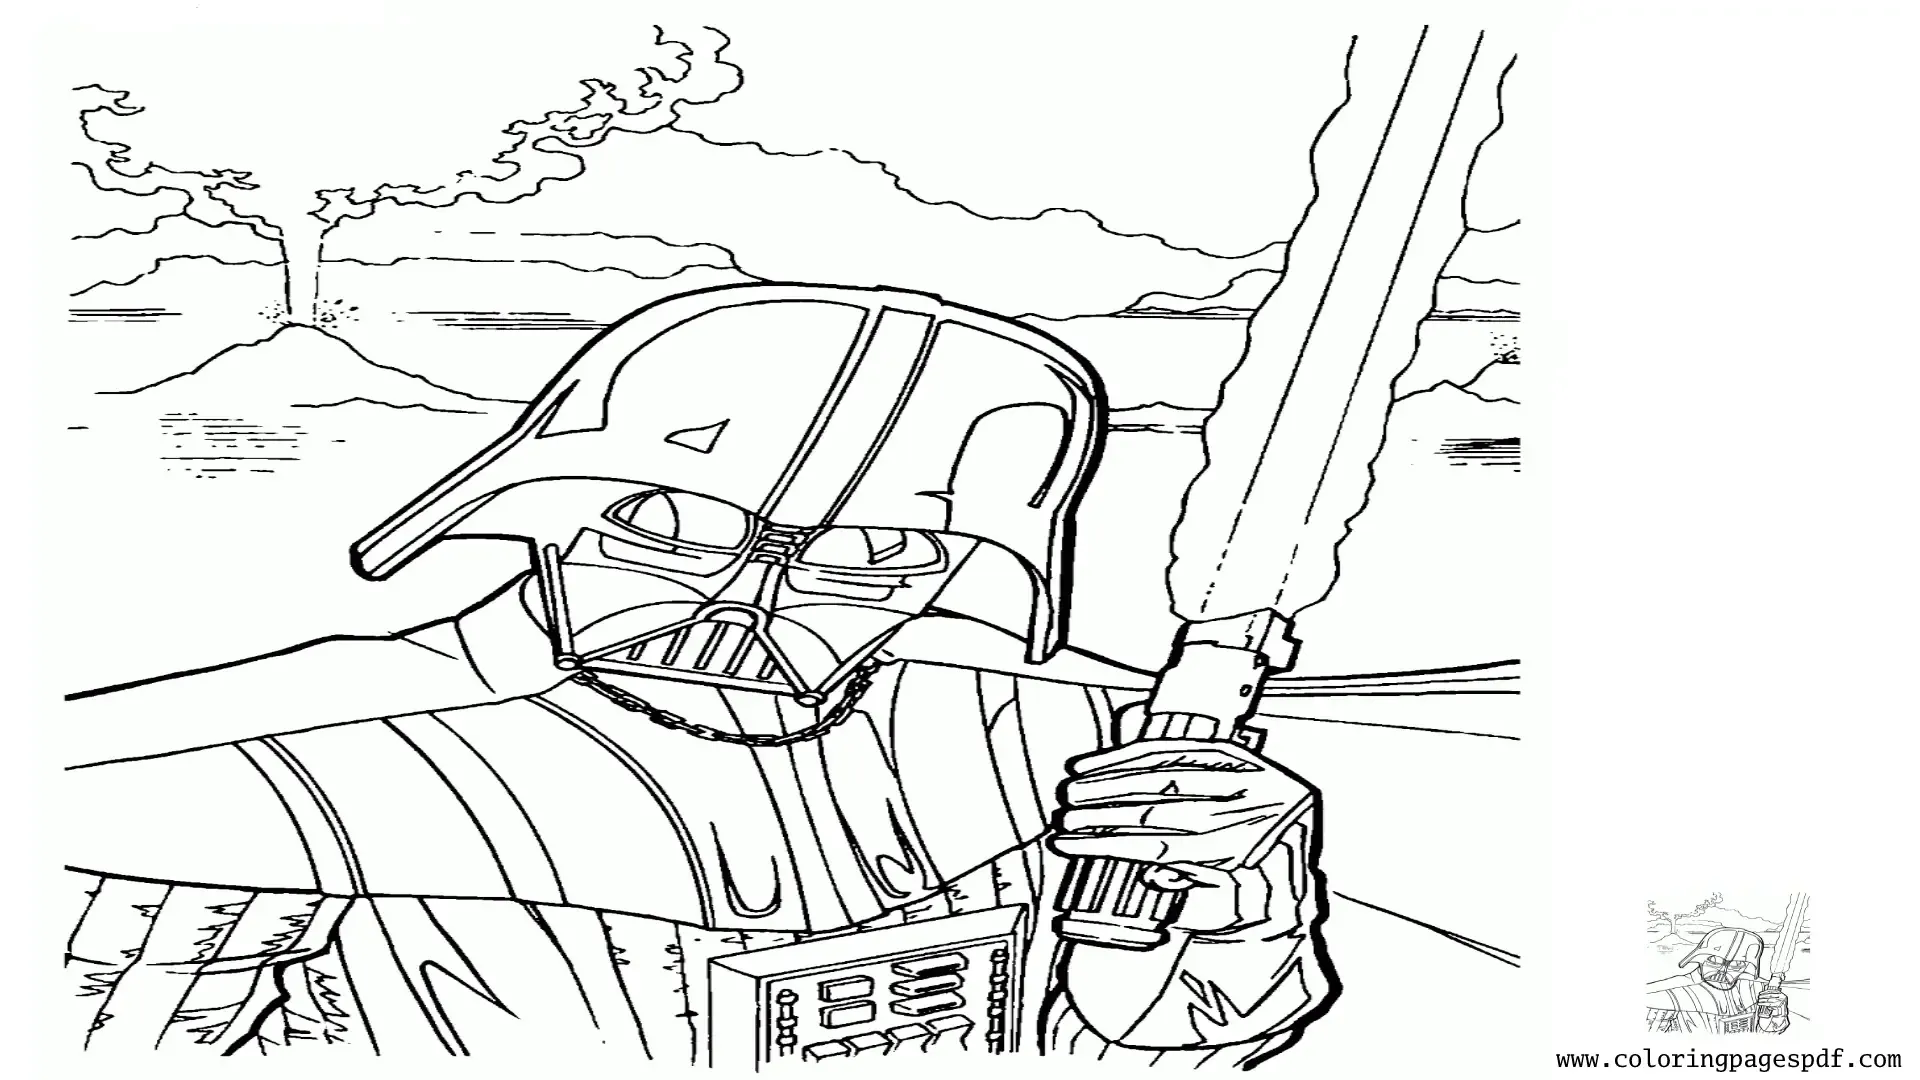 Coloring Pages Of Darth Vader With A Light Saber